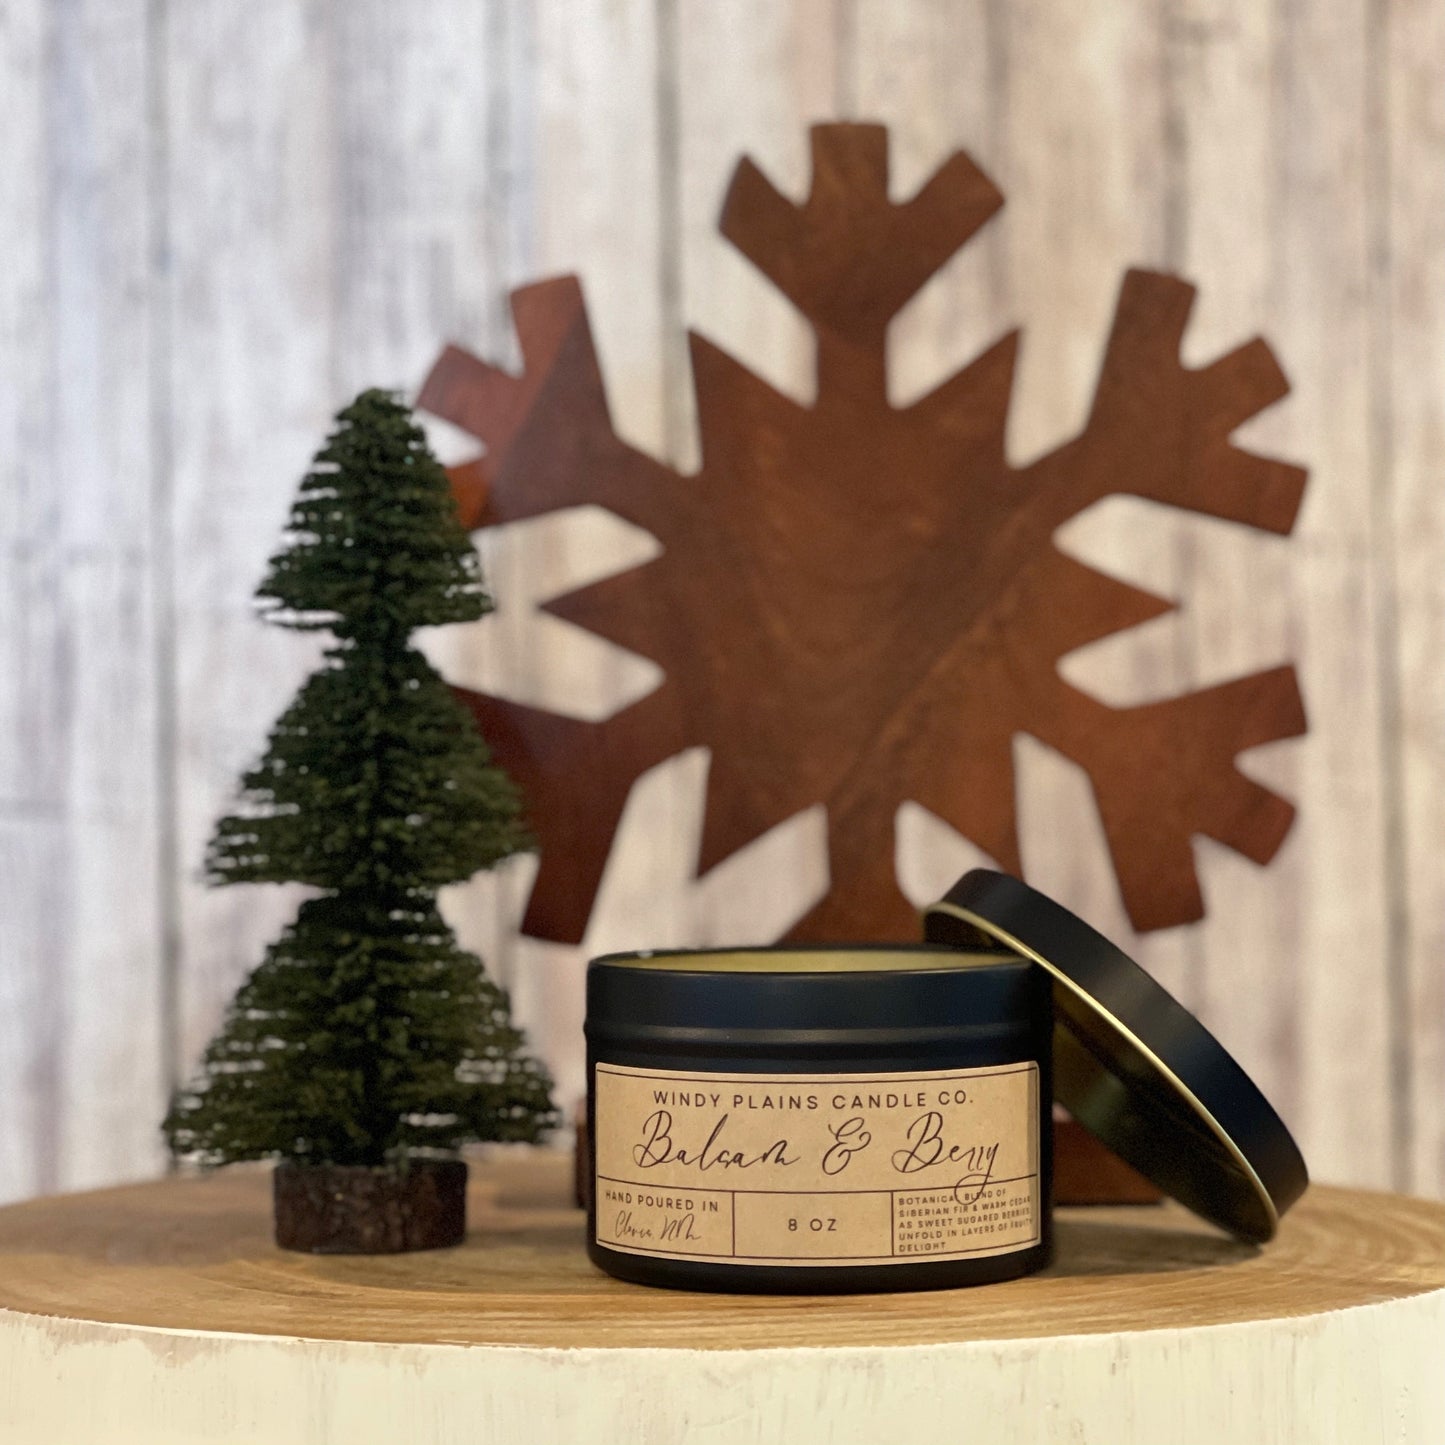 Balsam & Berry Candle